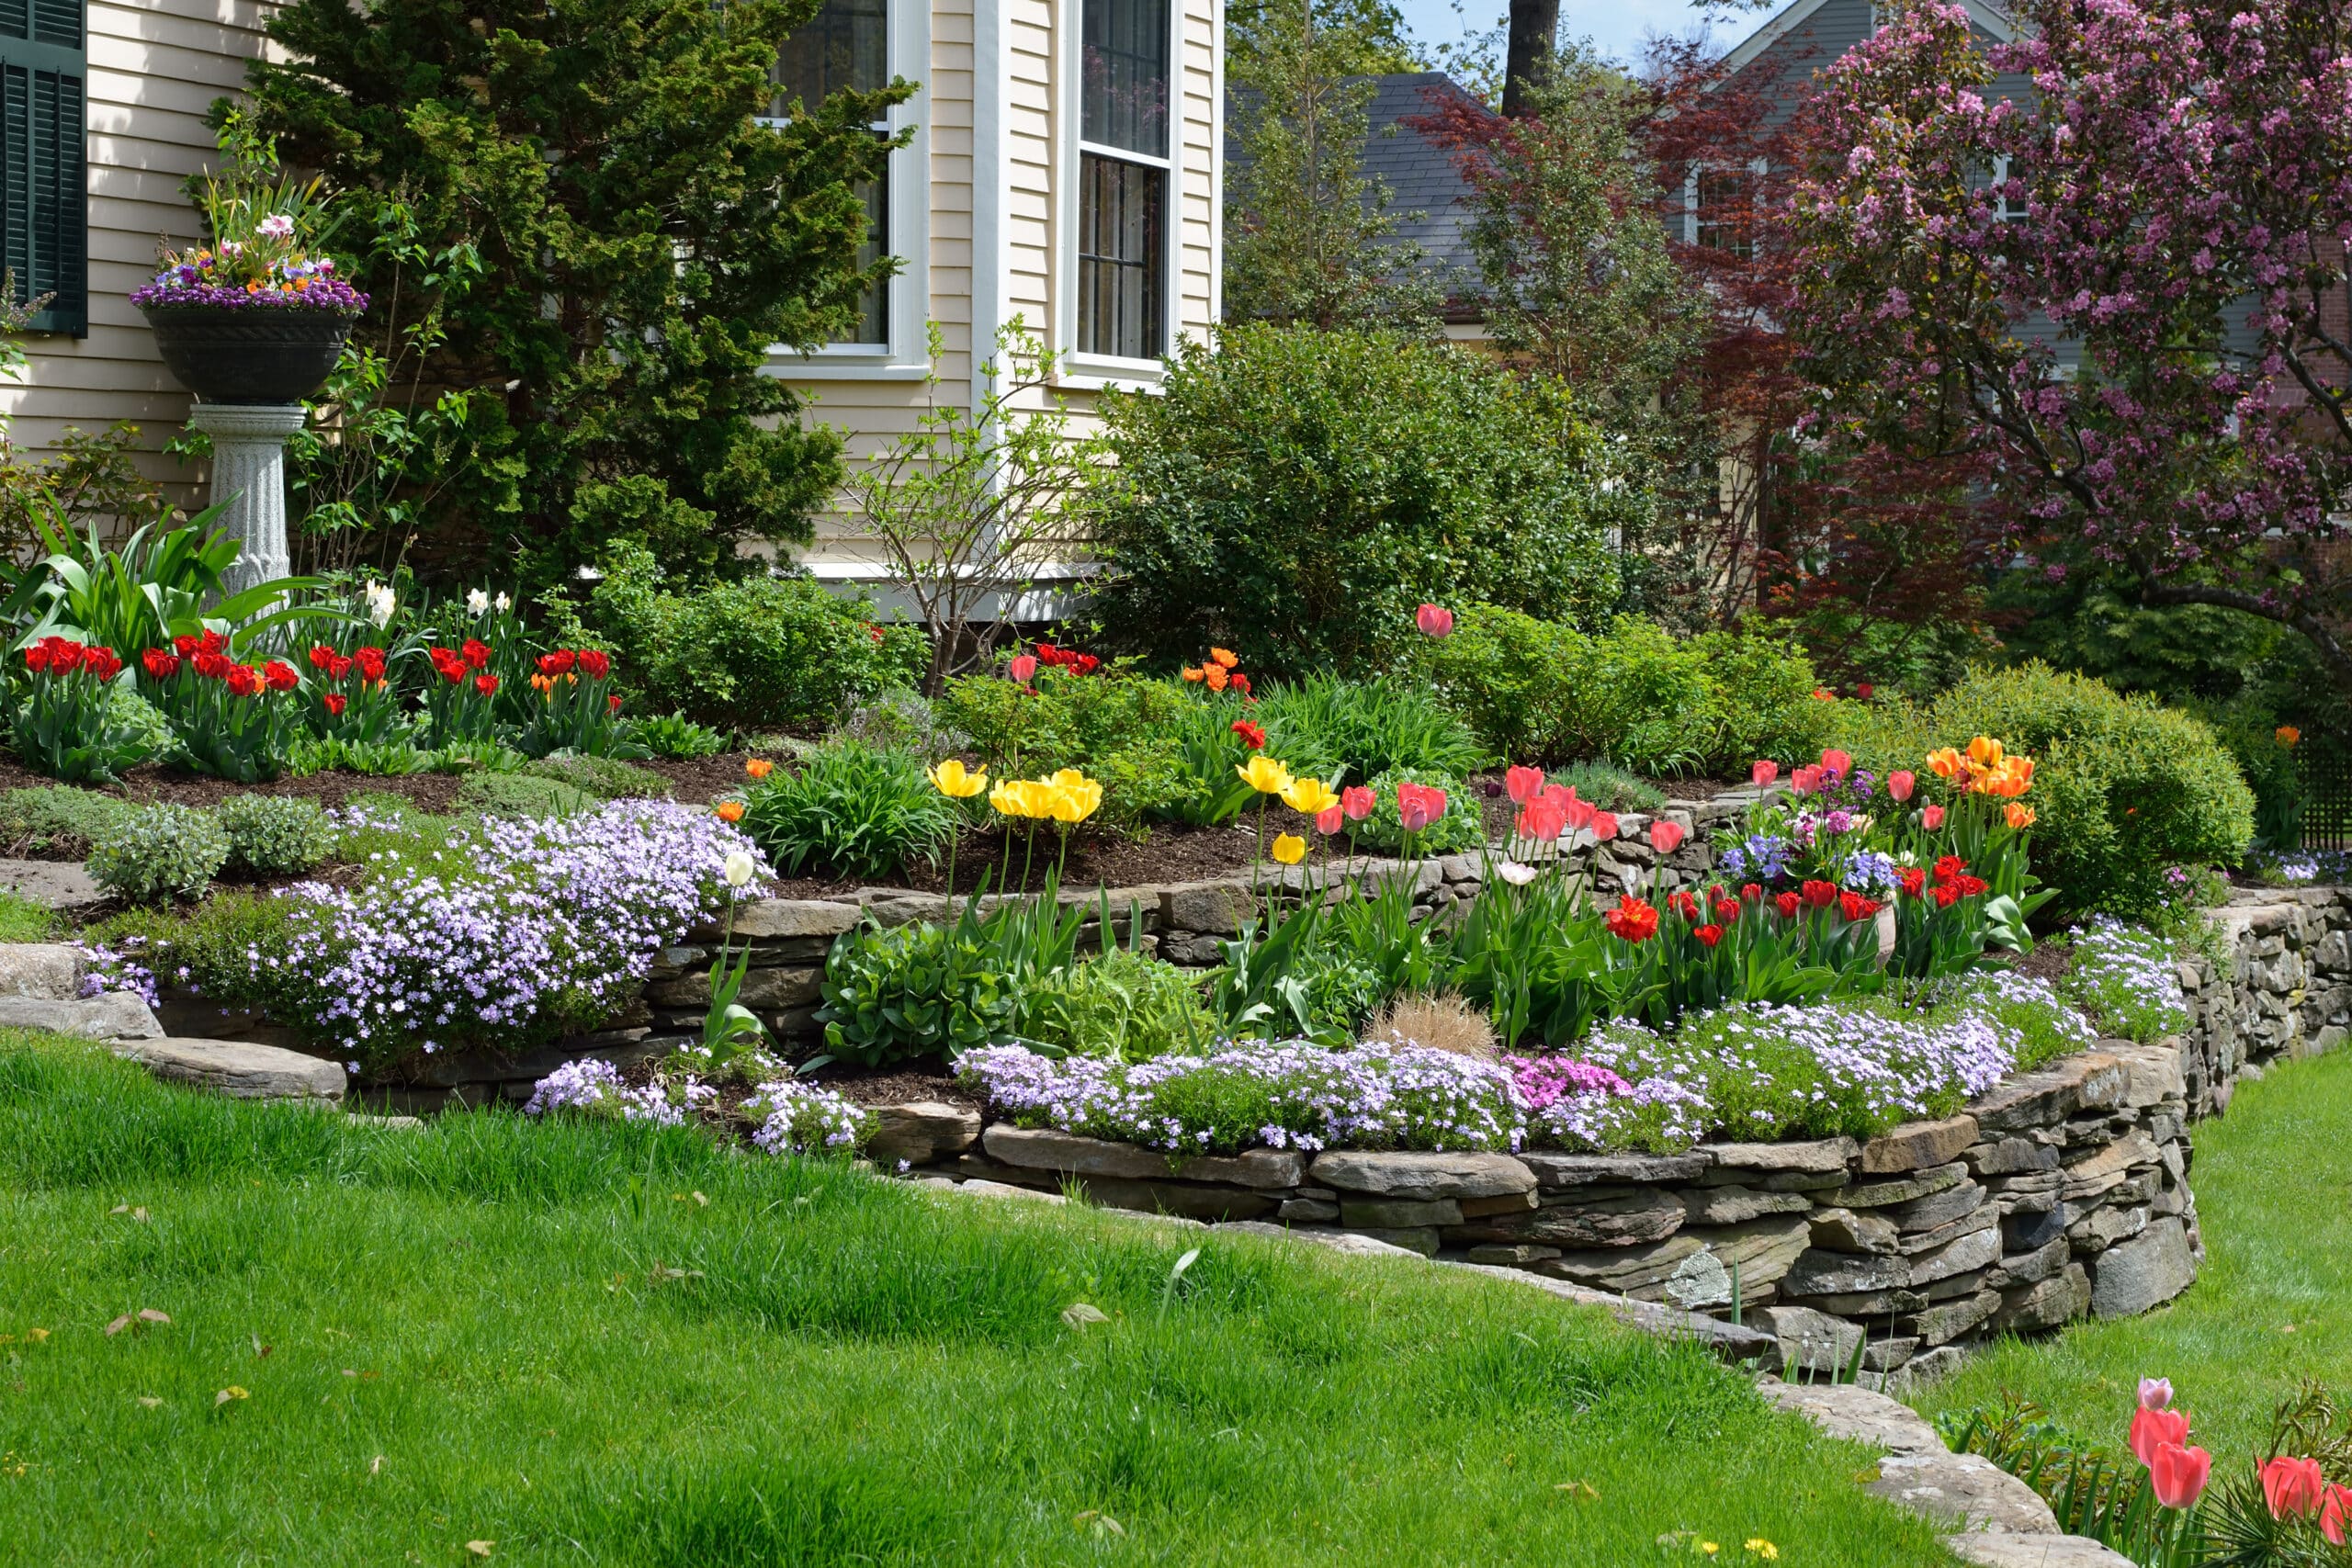 Top 5 Landscaping Ideas To Enhance The Yard 4 | Superior Service Pros custom landscaping 1.jpeg scaled